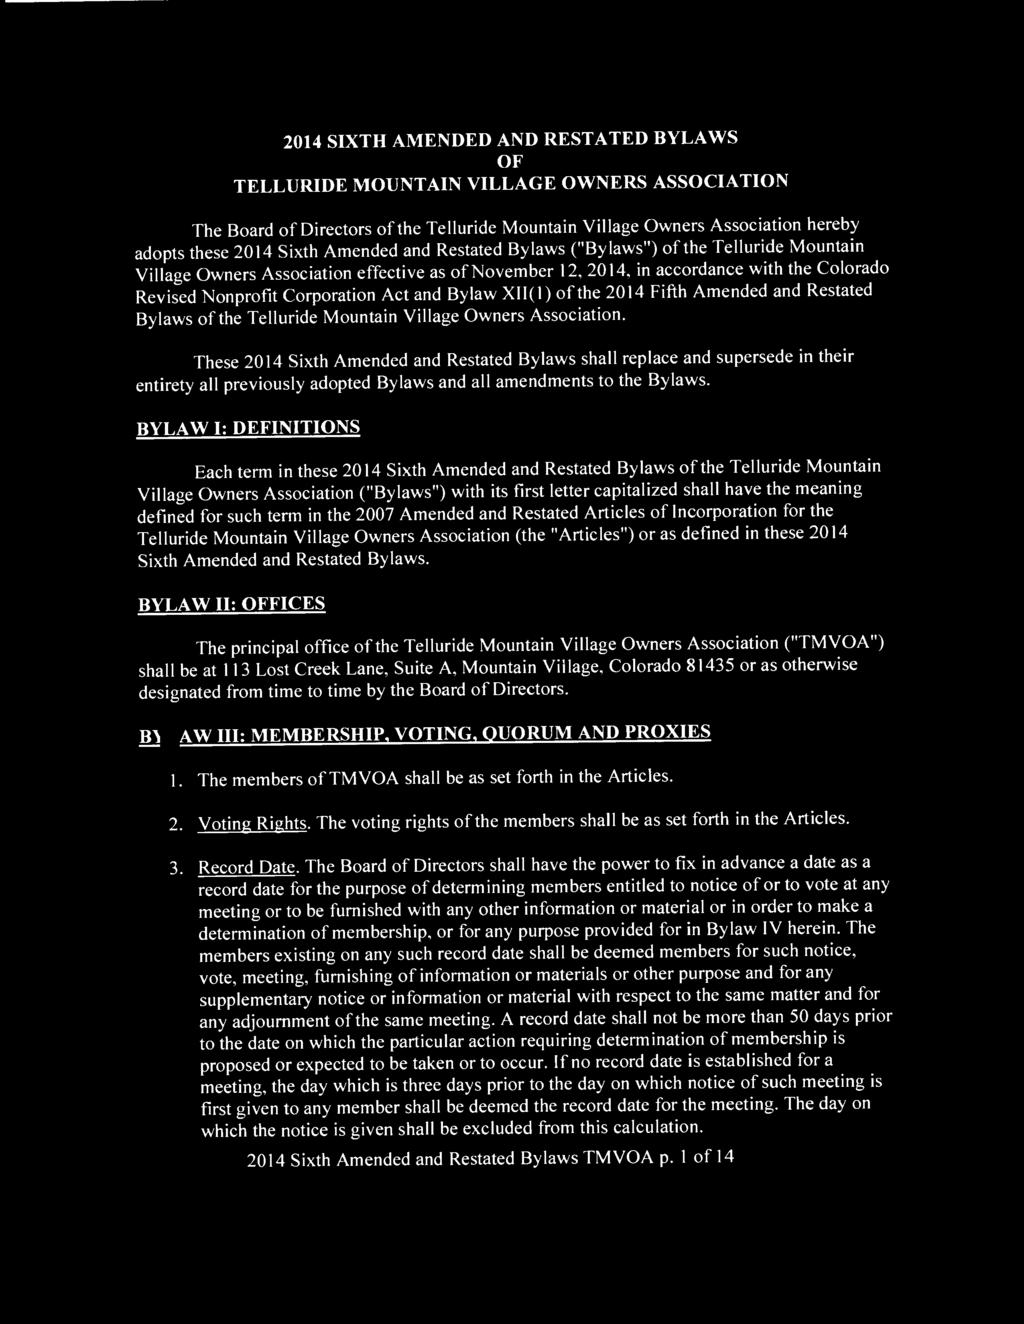 2014 SIXTH AMENDED AND RESTATED BYLAWS OF TELLURIDE MOUNTAIN VILLAGE OWNERS ASSOCIATION The Board of Directors of the Telluride Mountain Village Owners Association hereby adopts these 2014 Sixth